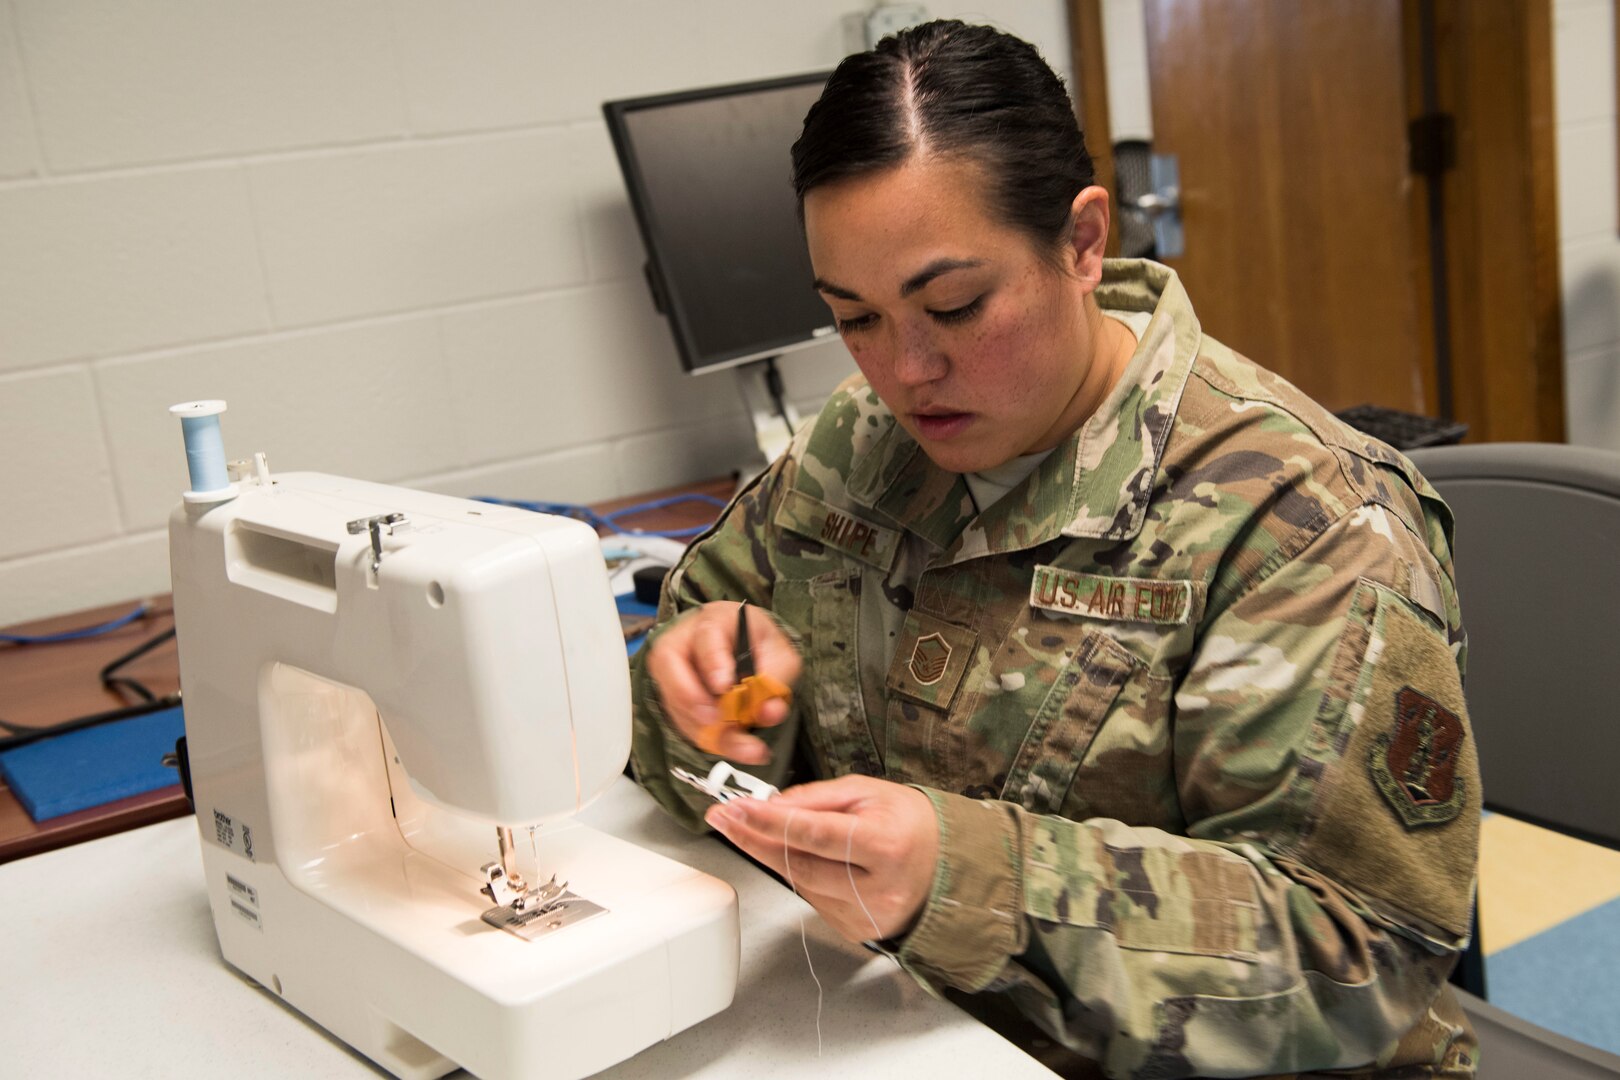 Master Sgt. Jesseca Shipe, a maintenance support supply technician for the 167th Logistics Readiness Squadron, sews cloth face coverings in support of the West Virginia National Guard's COVID-19 response at the 167th Airlift Wing, April 20, 2020. Shipe is the 167th AW Airman Spotlight for August 2020.